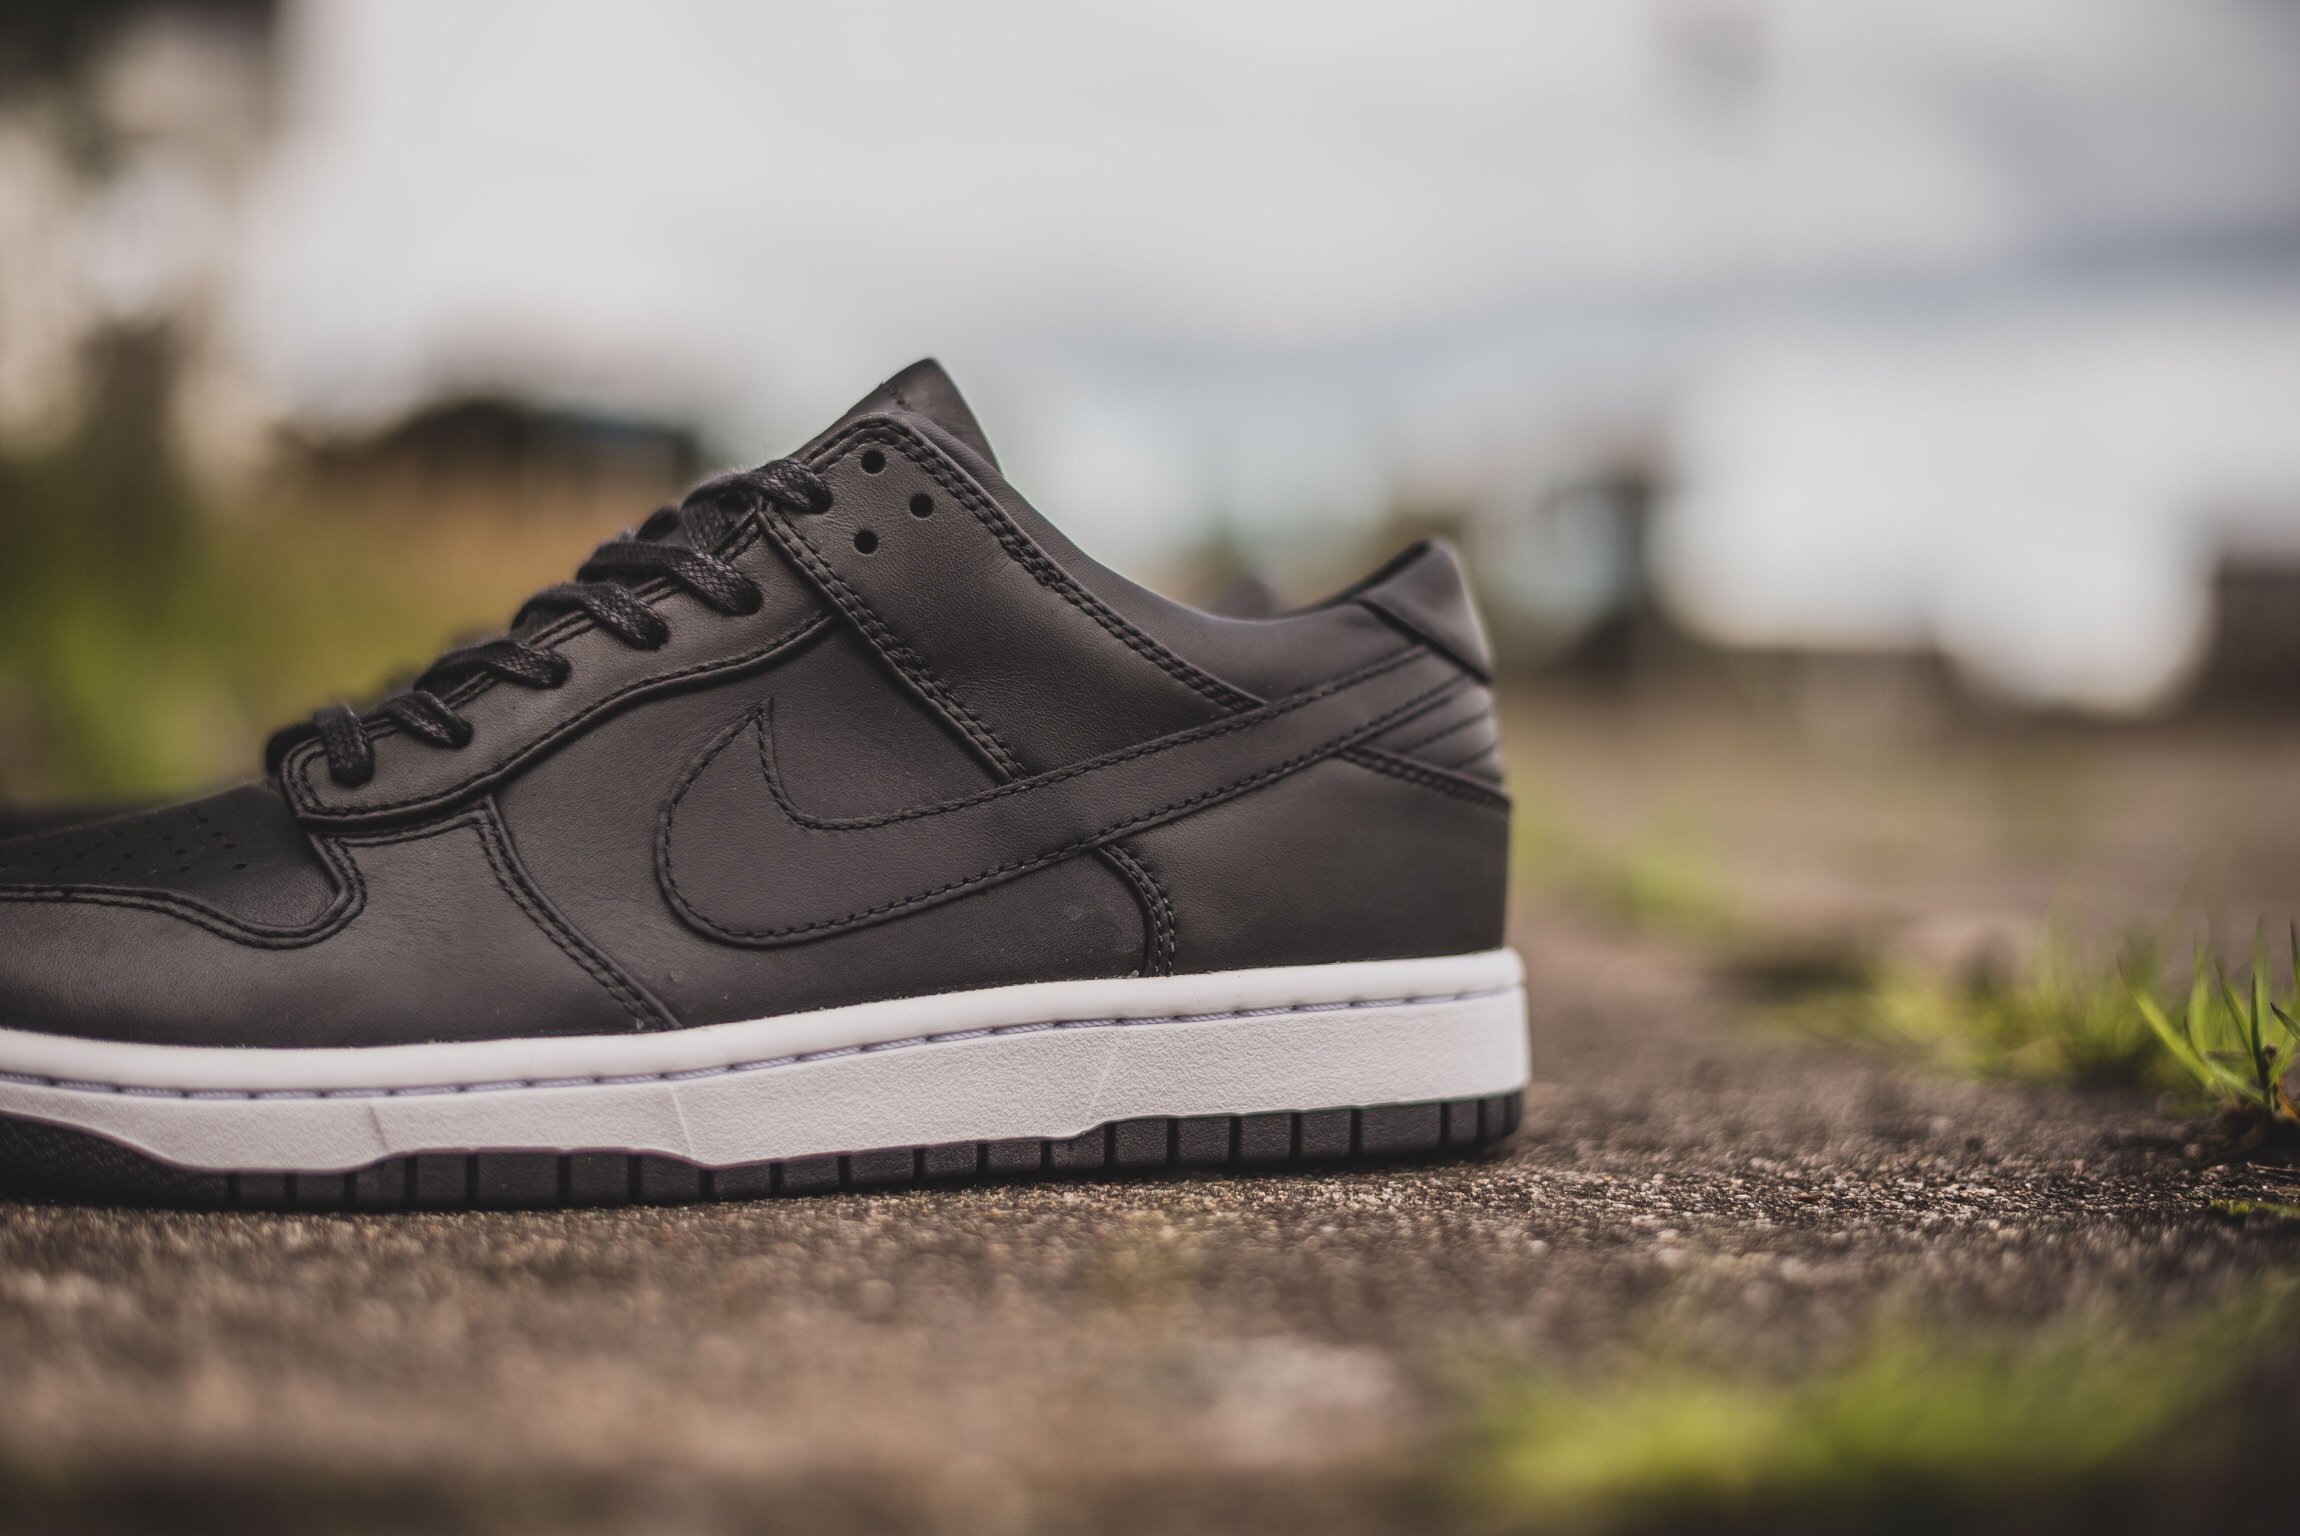 on Twitter: "NikeLab Dunk Lux Low is available to buy now! #hanon #nike https://t.co/f0mmxzY0SY https://t.co/kWVYgpIYfL" / Twitter